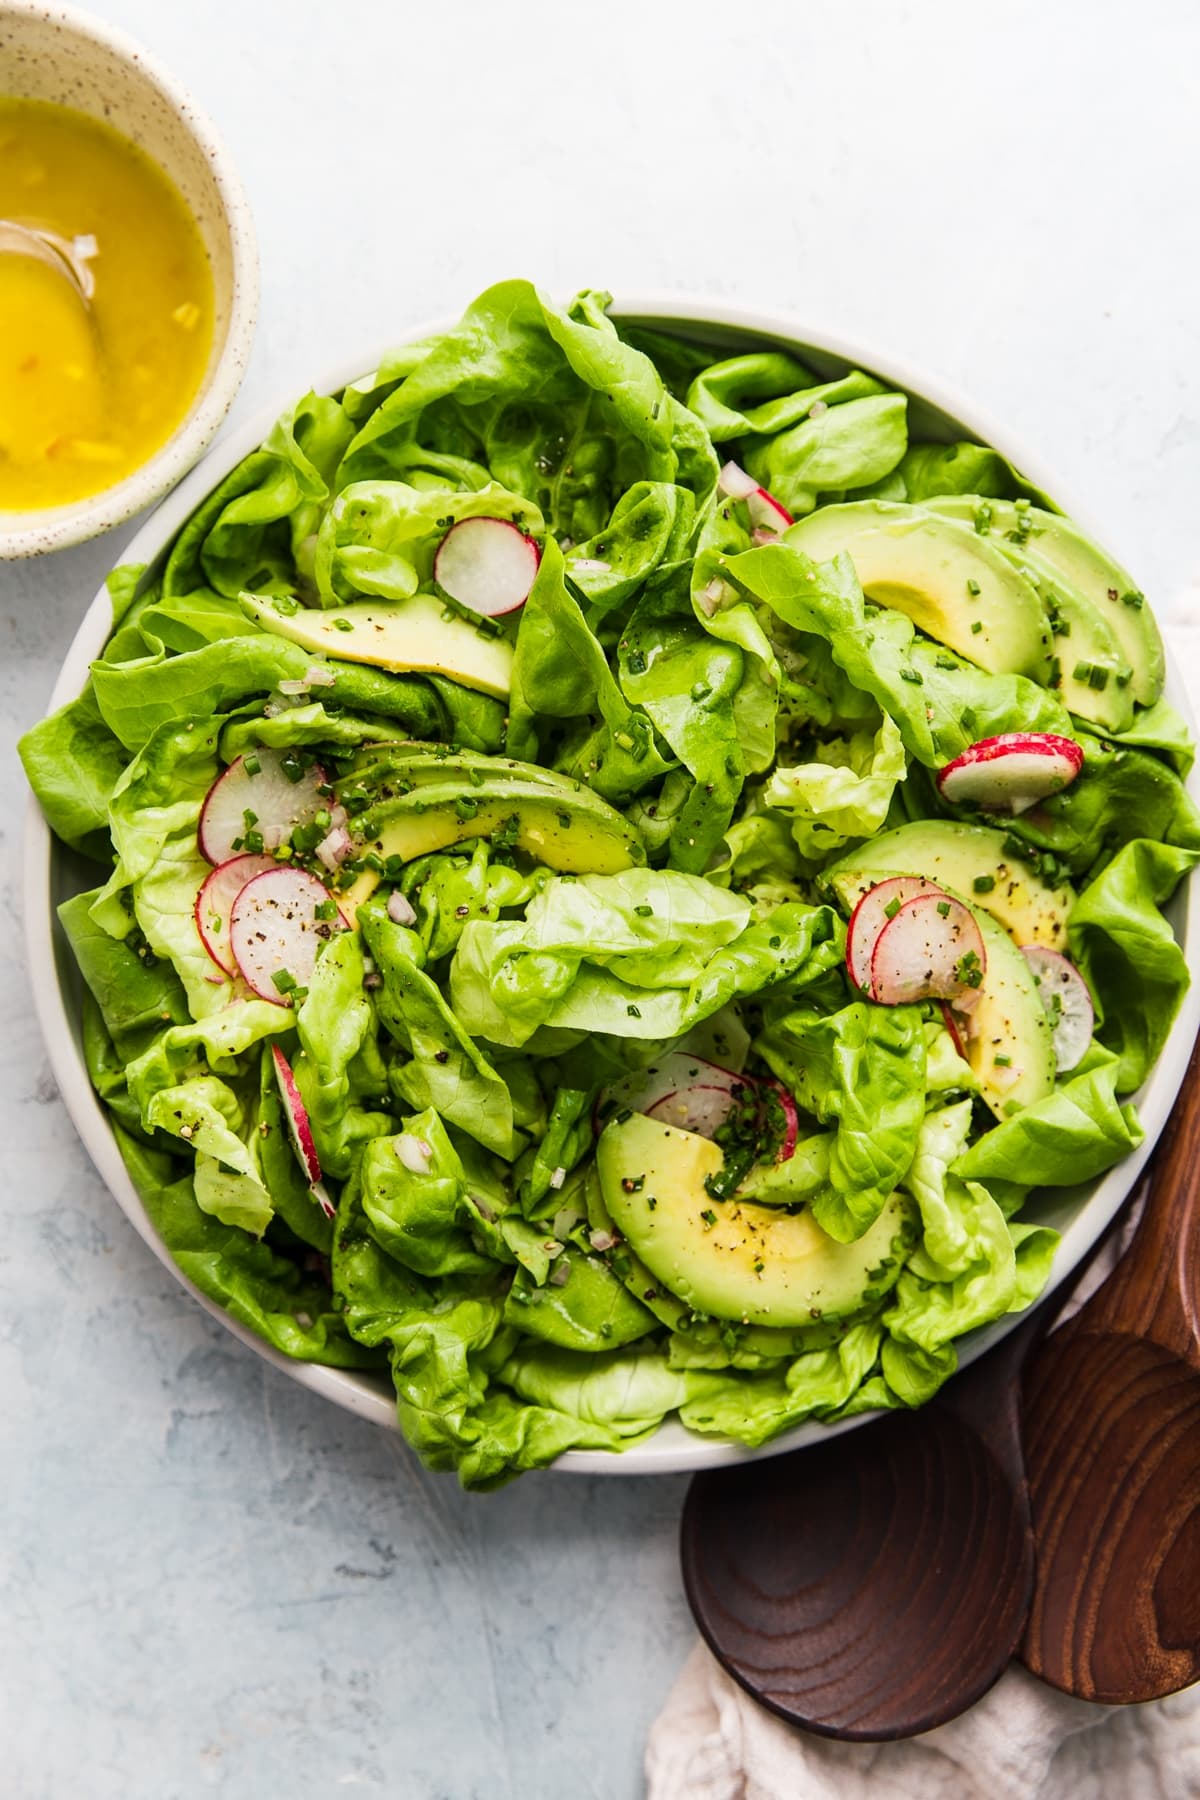 Butter lettuce salad with a honey dijon mustard vinaigrette with radishes, chives, and avocado in a bowl